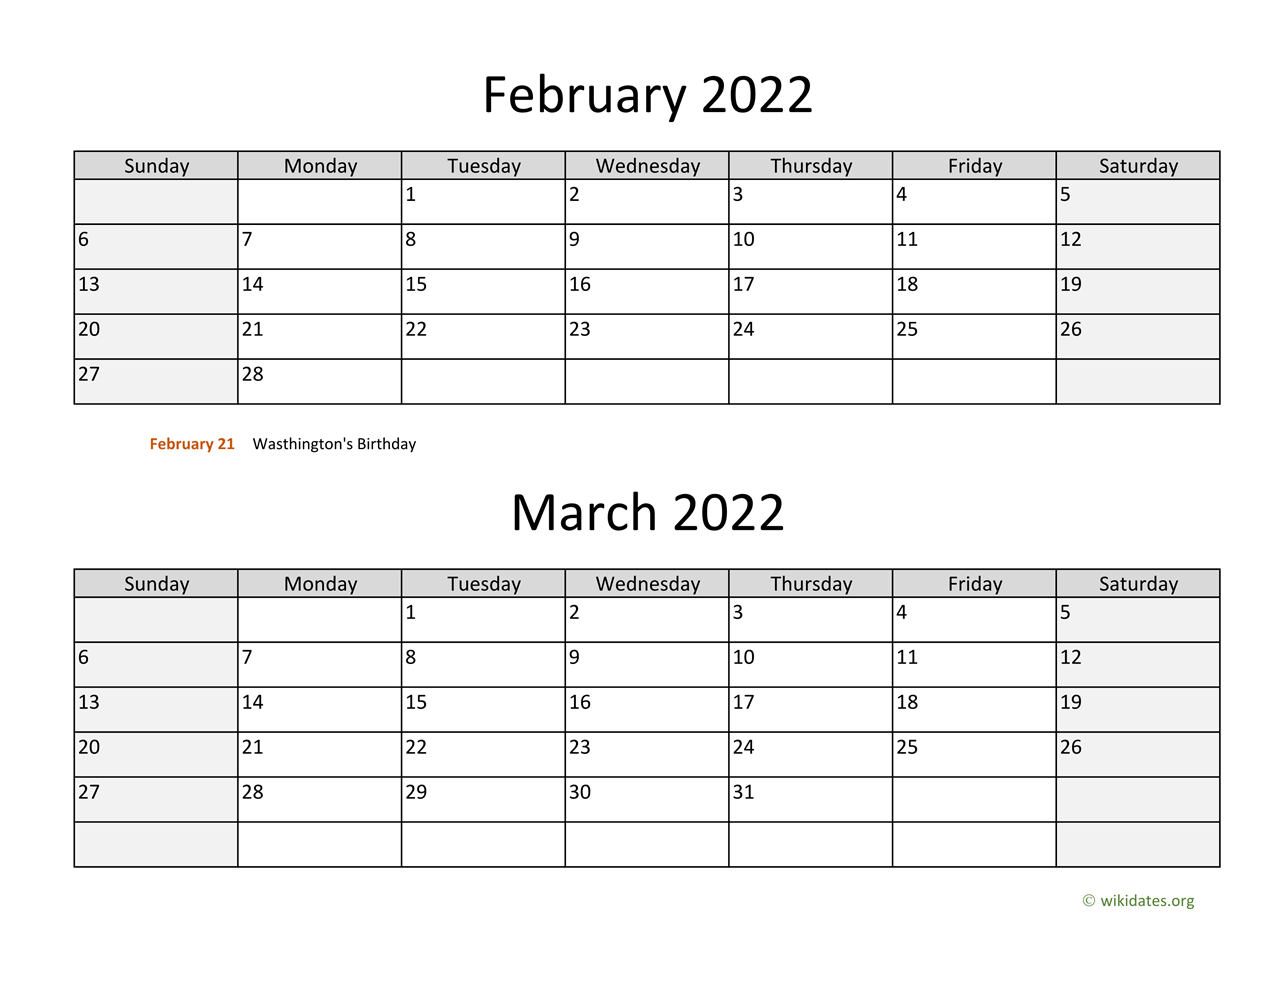 February And March Calendar 2022 February And March 2022 Calendar | Wikidates.org